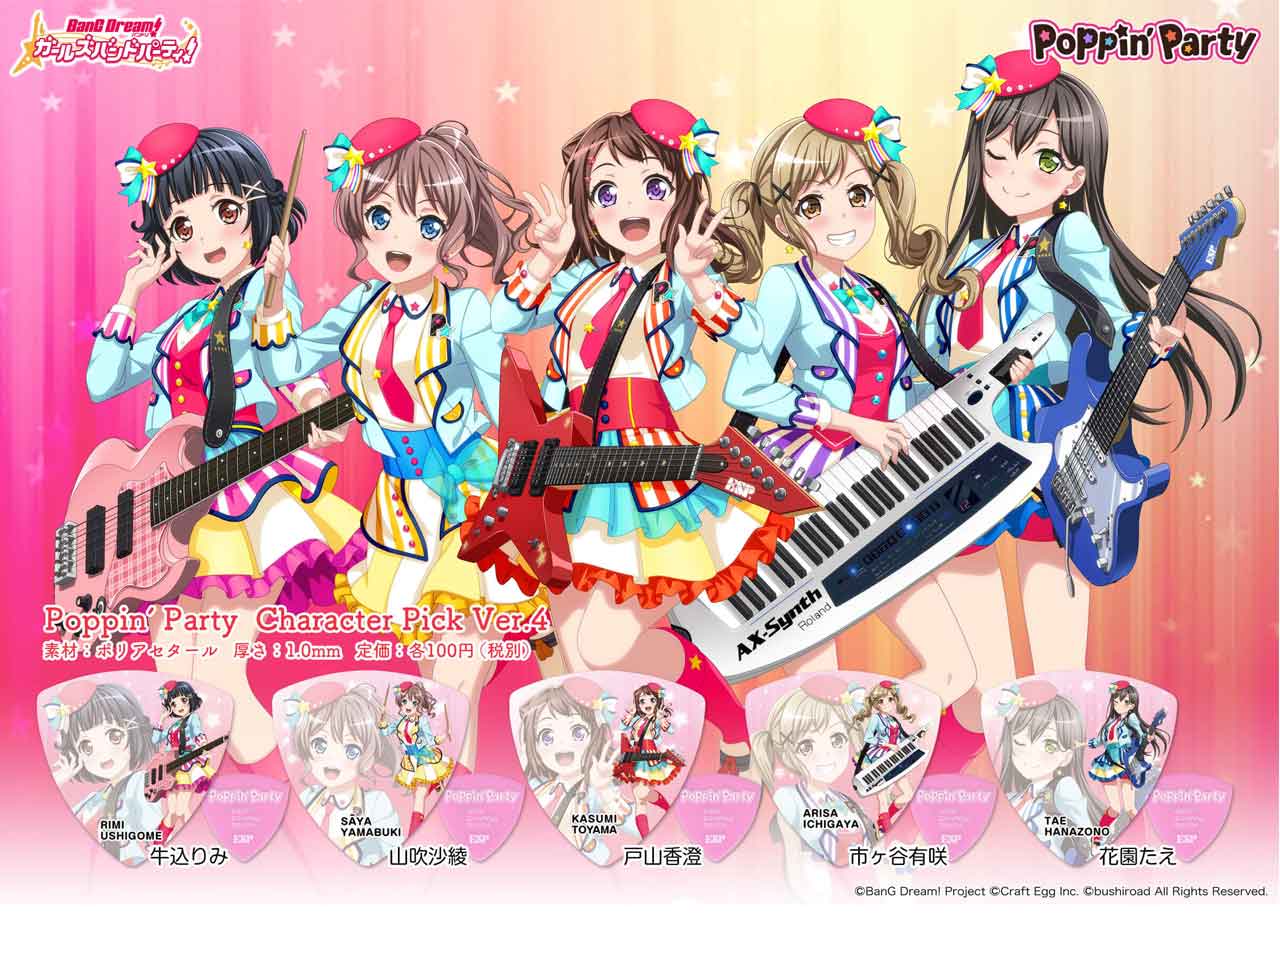 【ESP×BanG Dream!コラボピック】Poppin’Party Character Pick Ver.4 "市ヶ谷有咲"（GBP Arisa Poppin Party 4）＆”ハメパチ” セット